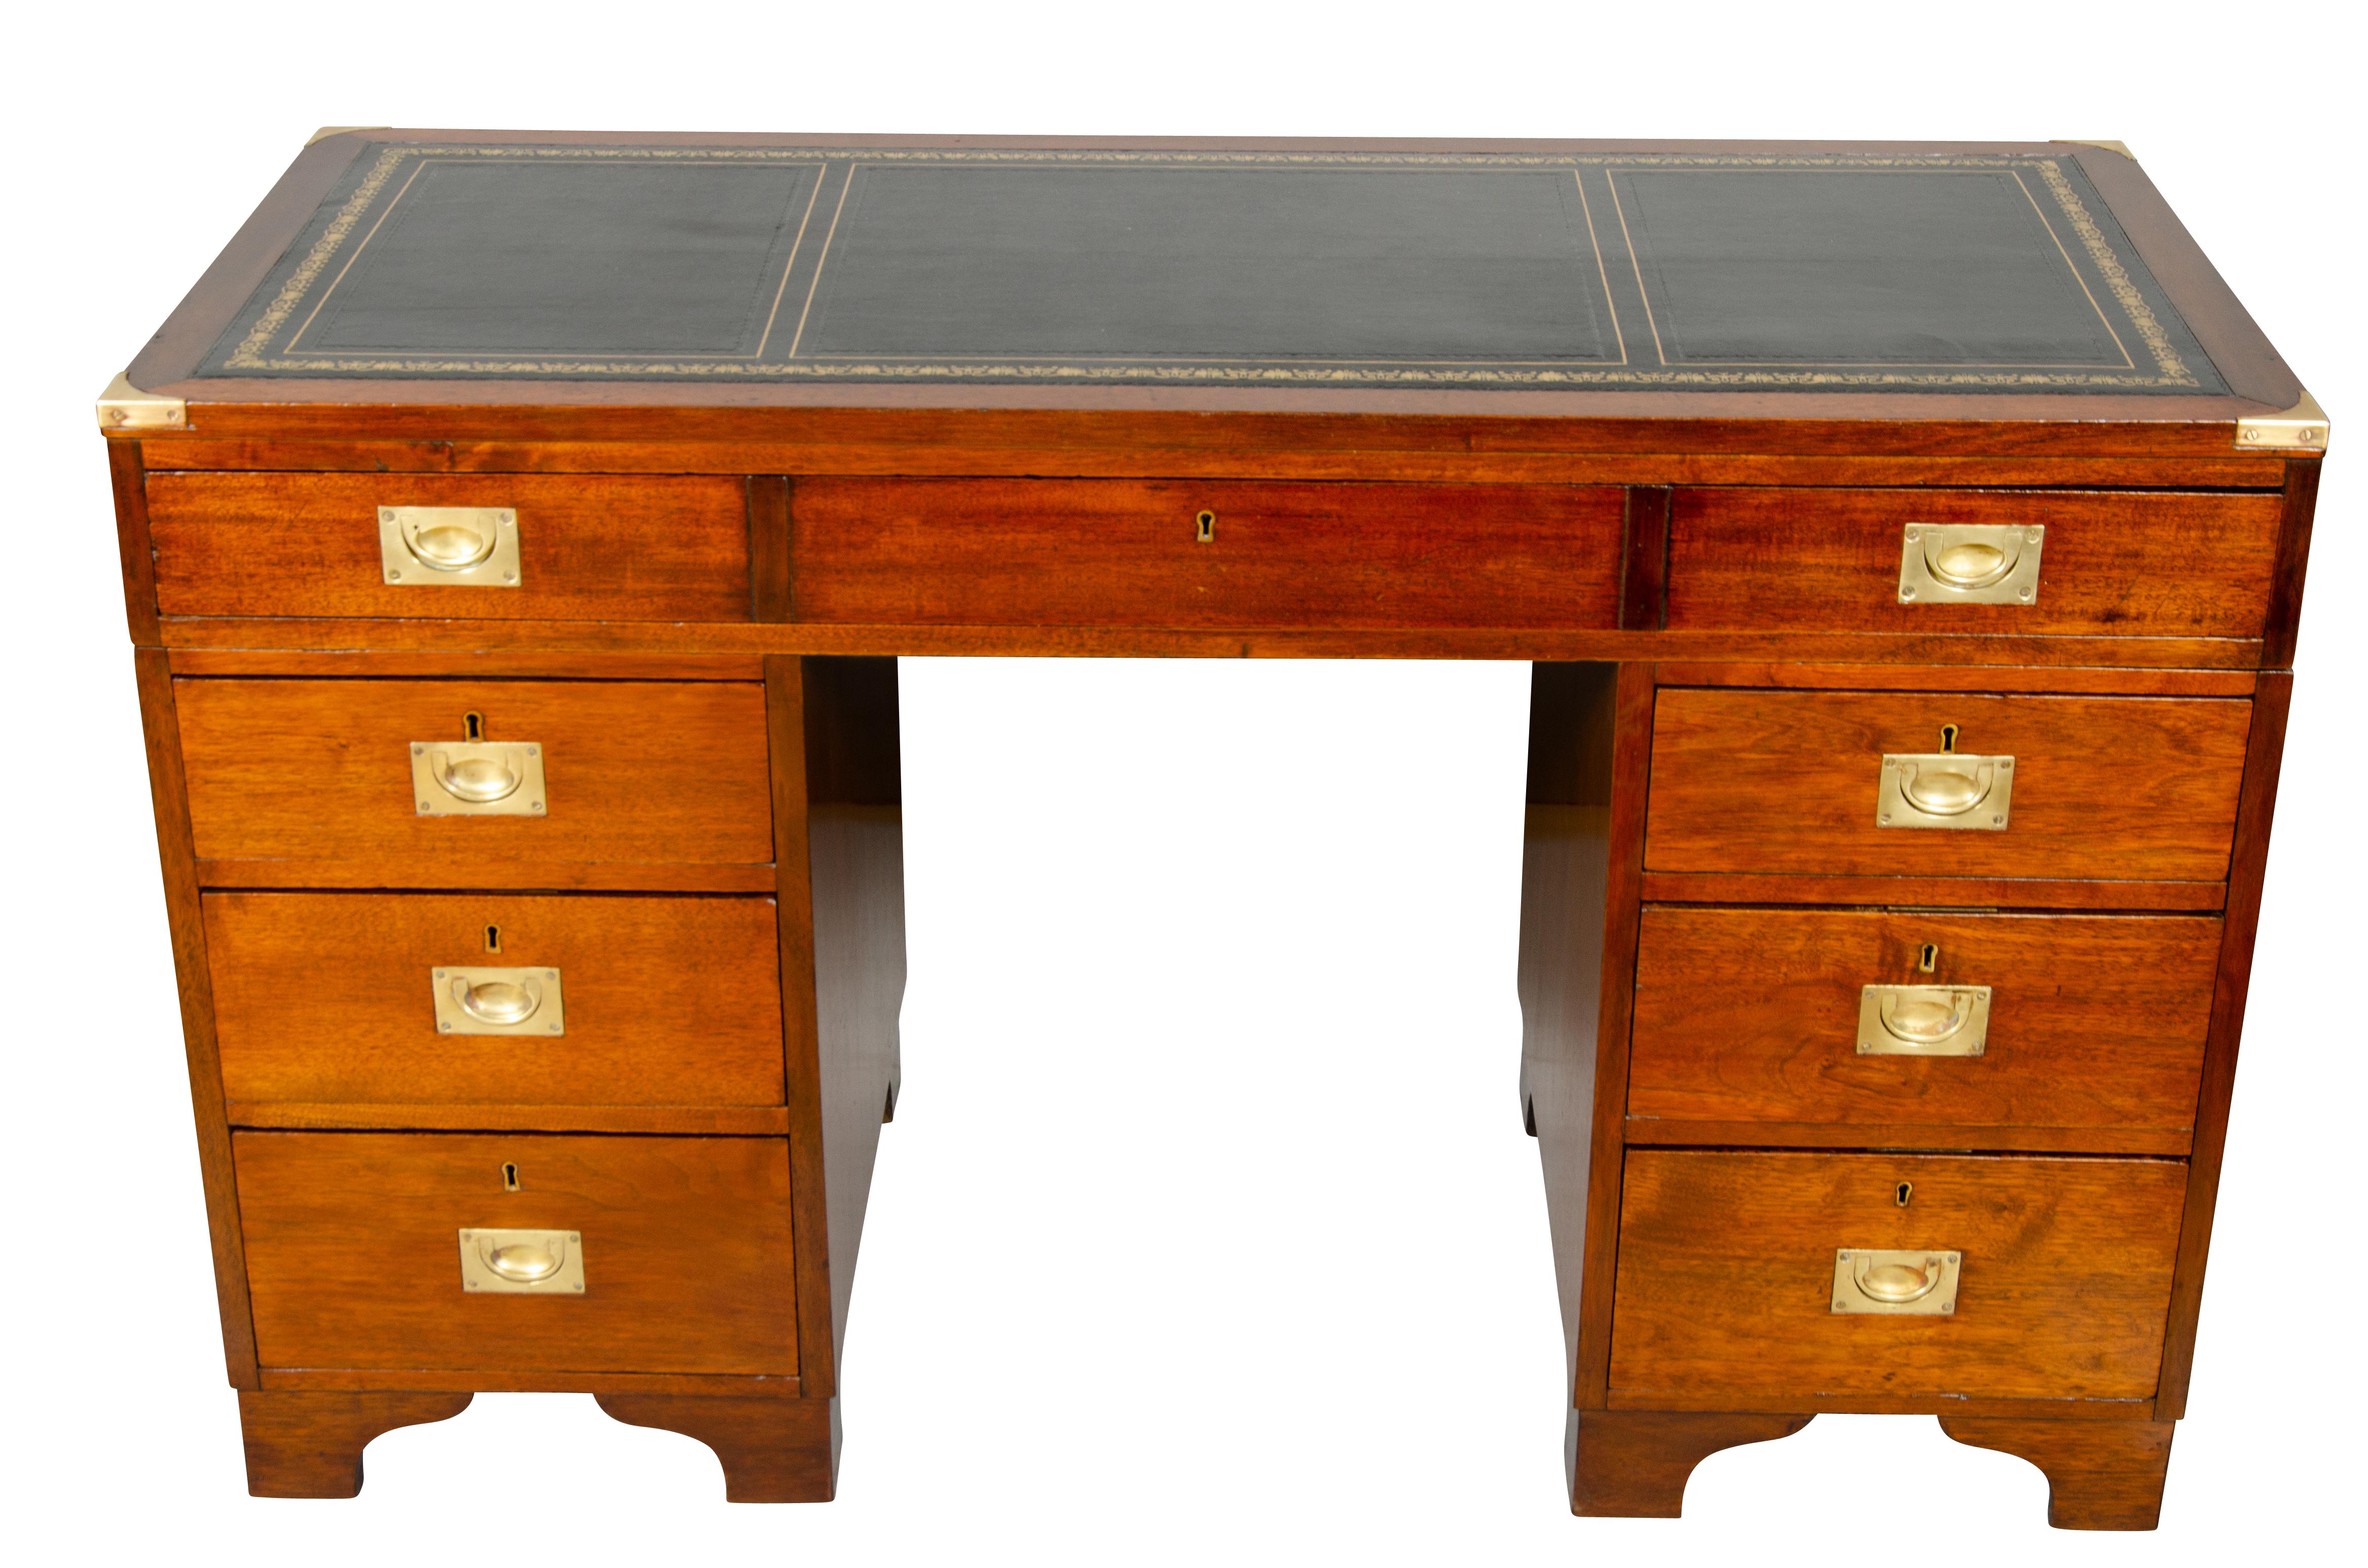 With a rectangular top with black leather set in a wood framed border, over a long drawer all seated on two pedestals each with three drawers, bracket feet. Stamped by maker Arthur Foley & Sons, Salisbury, 1891. The back of the desk is in finished